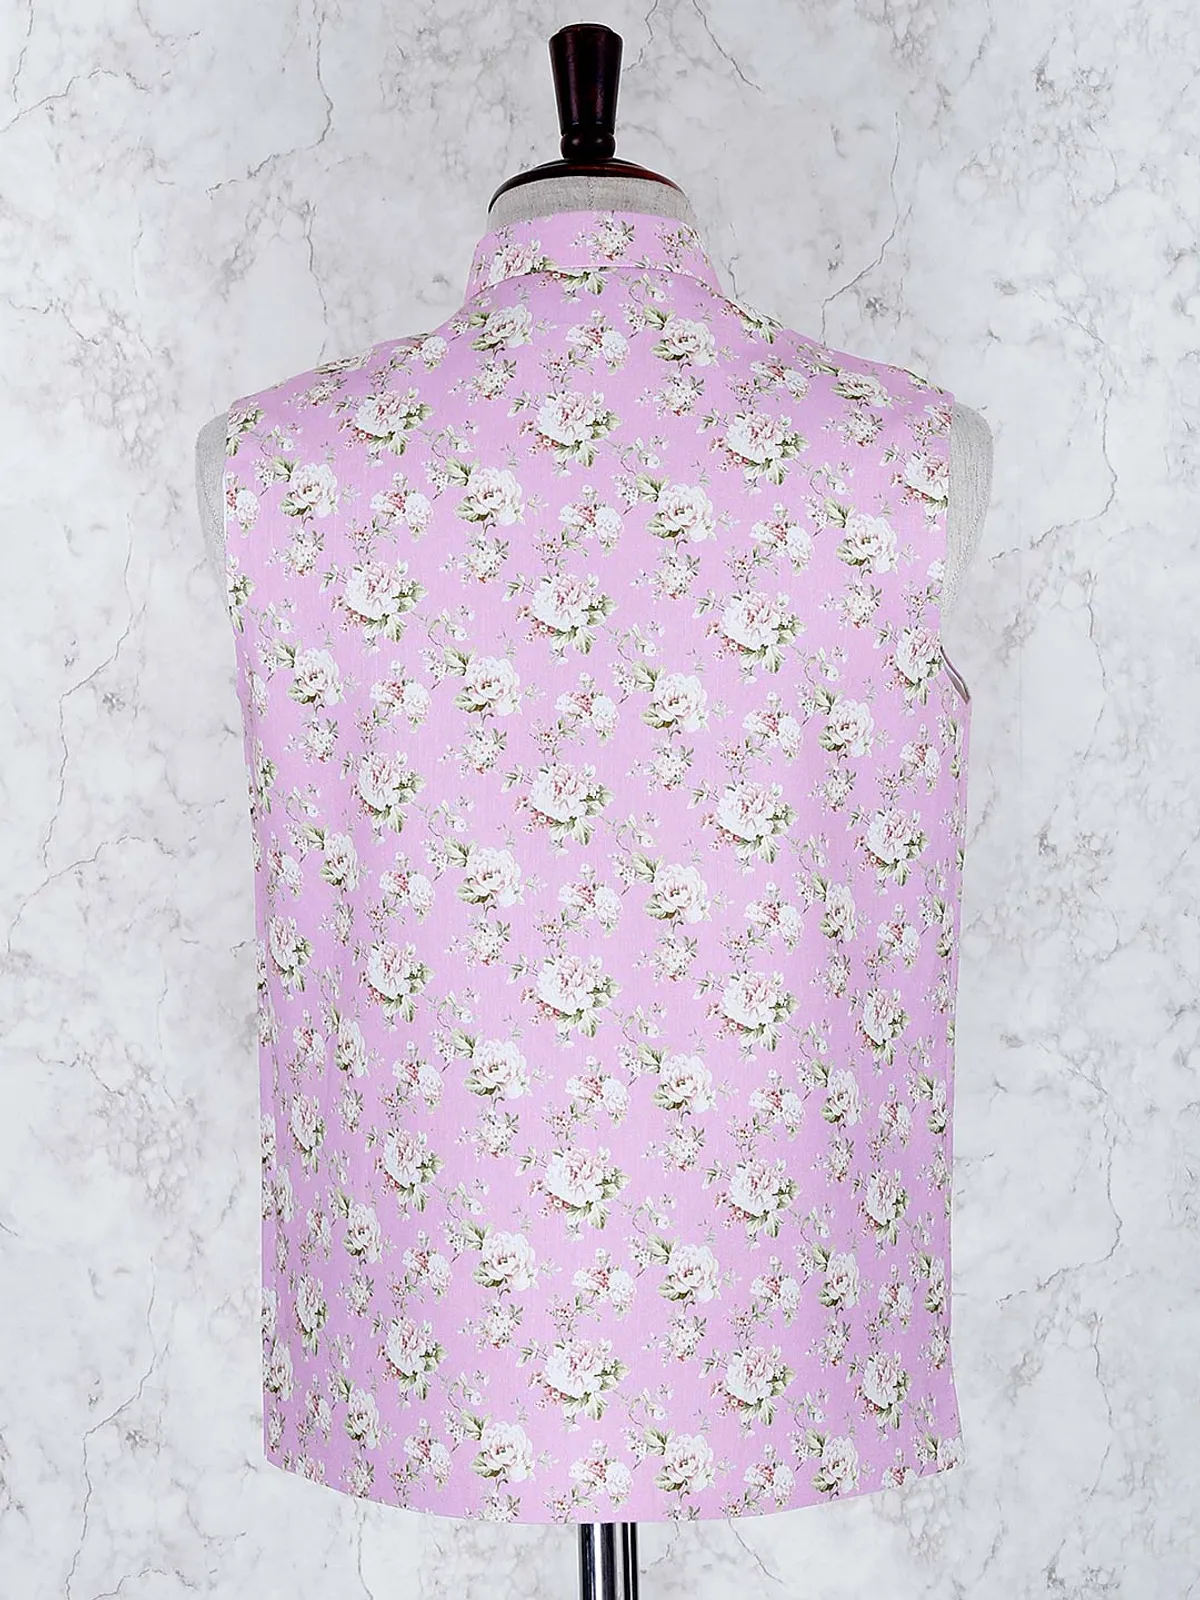 Pink color flower printed terry rayon waistcoat